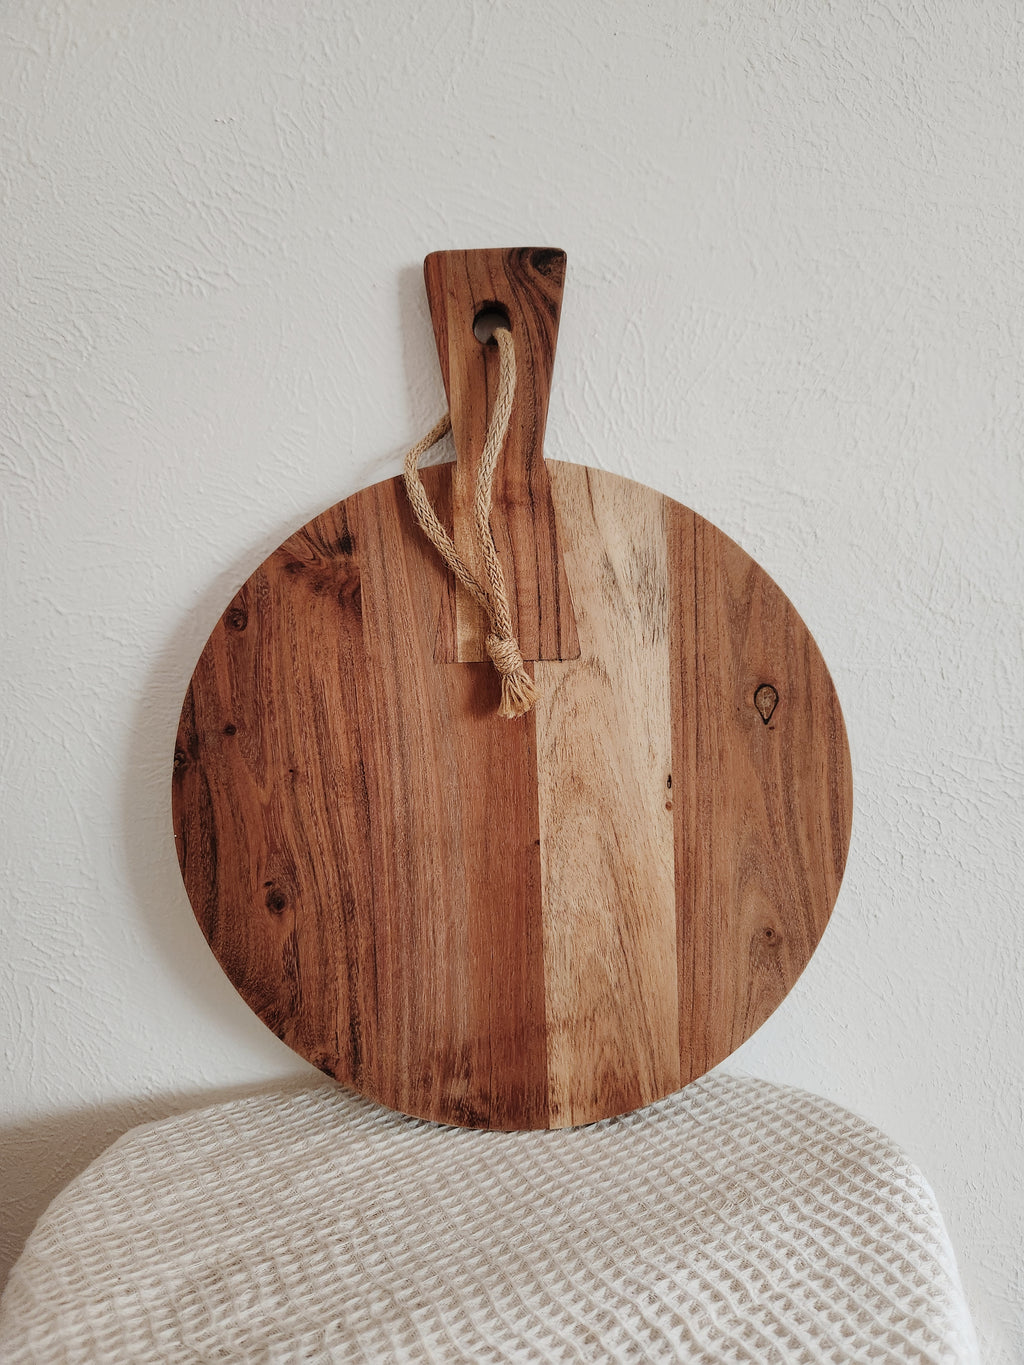 Wooden Kitchen Decor | Wall hanging | Earthy decor